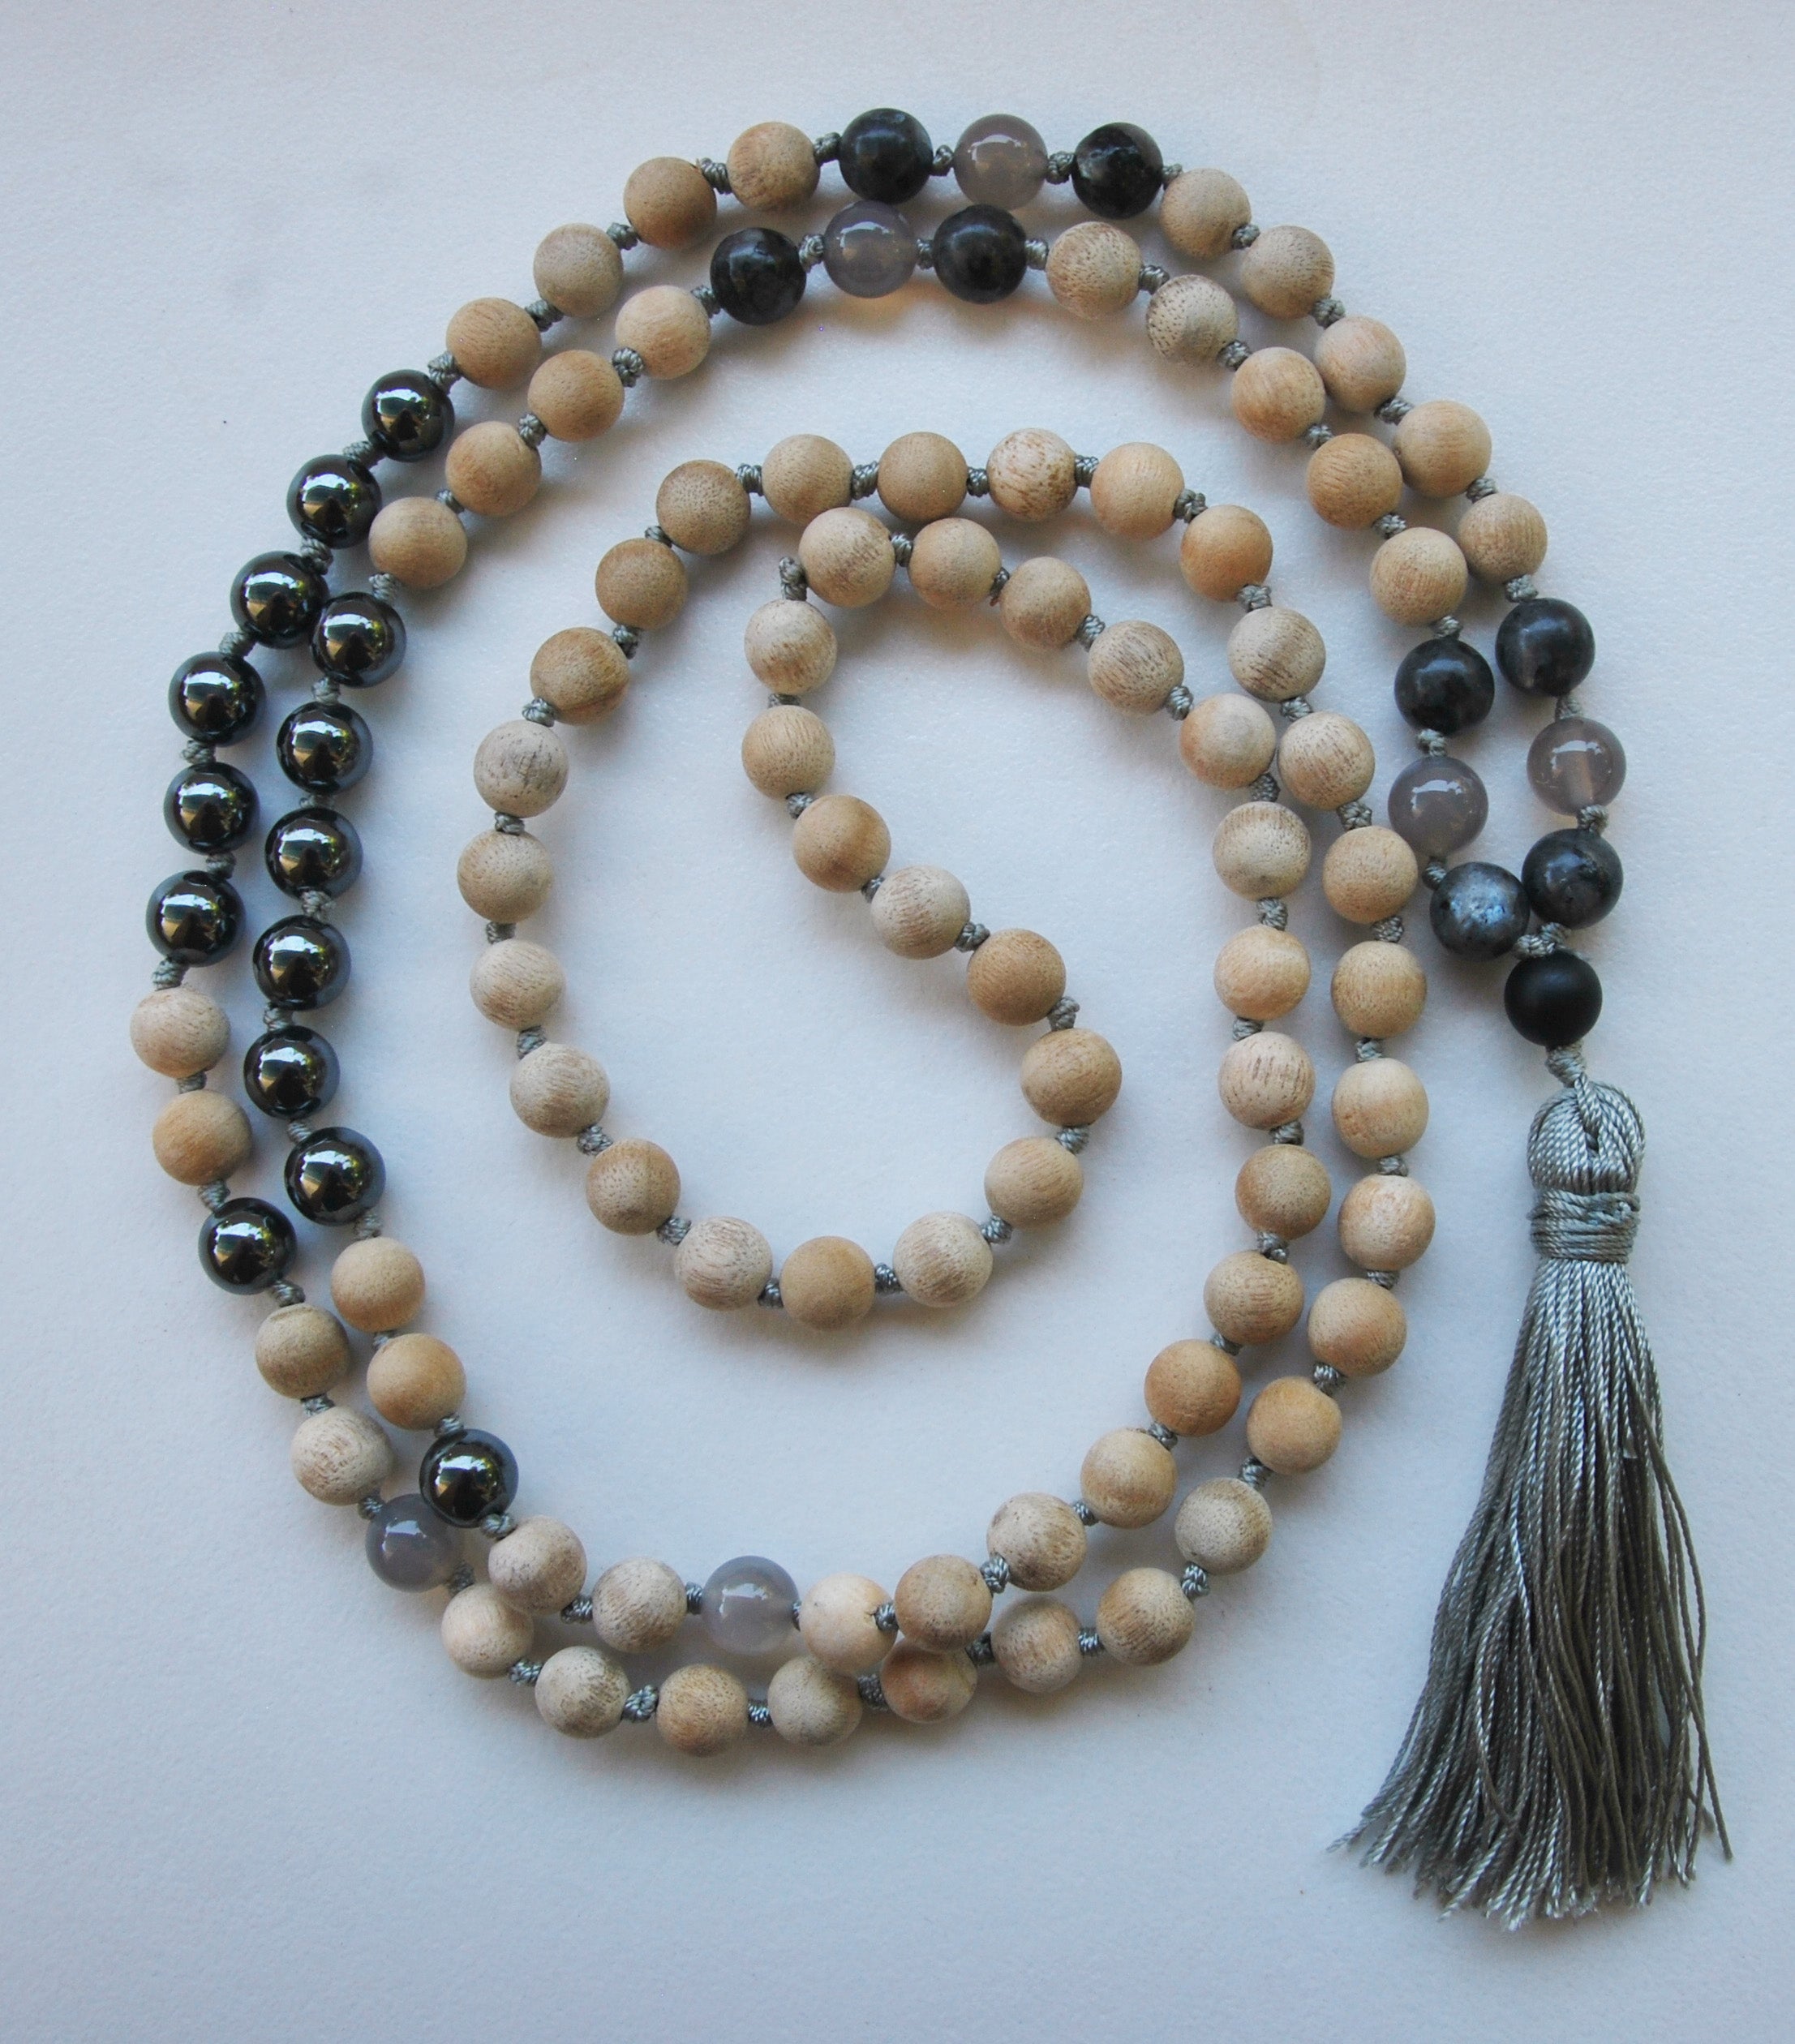 8mm Sandalwood & Hematite 108 Knotted Mala Necklace with Colored Tassel